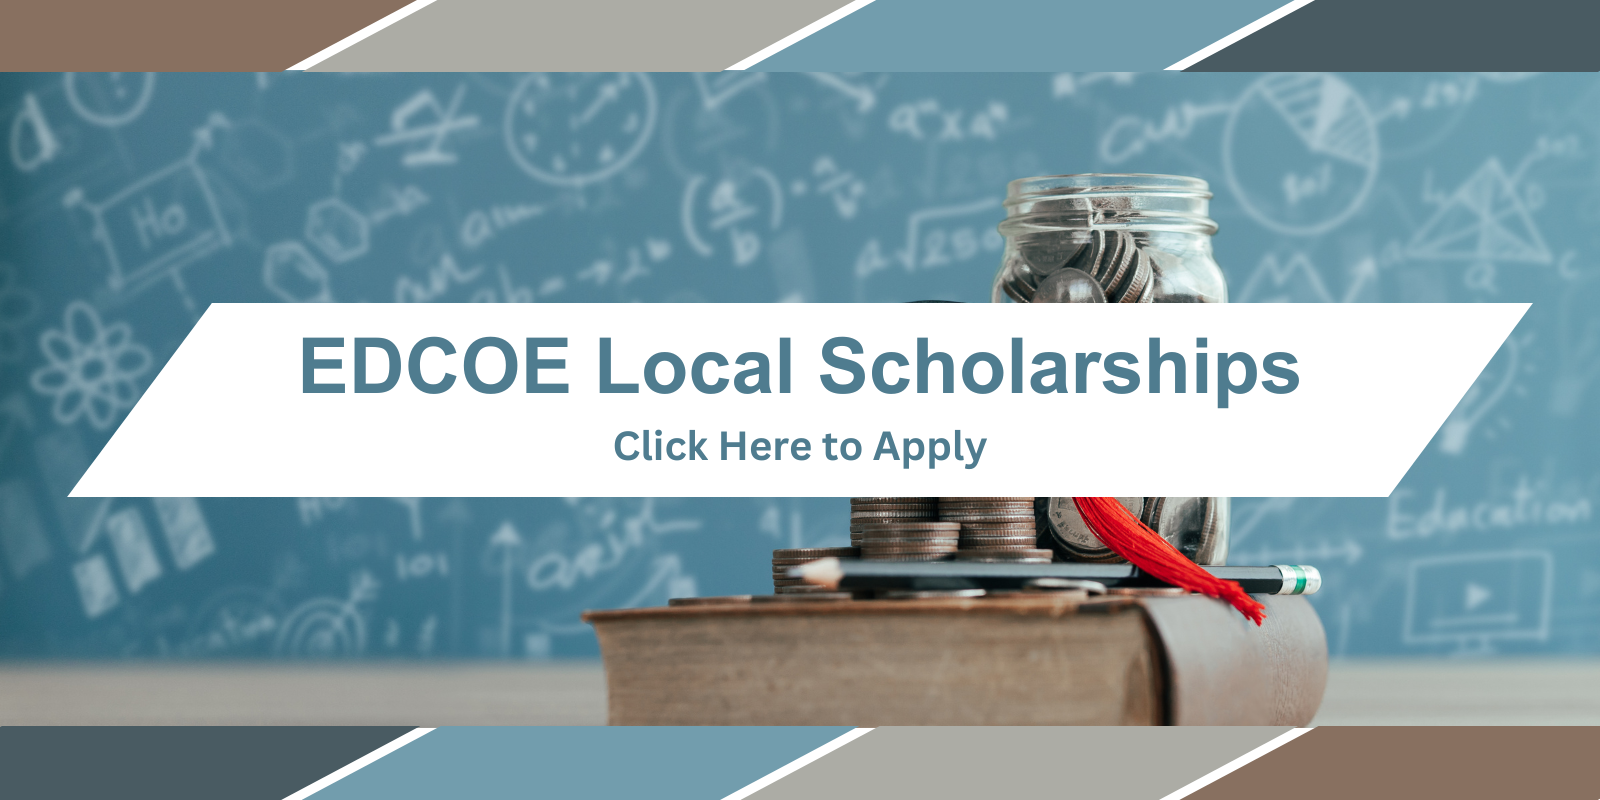 Click Here to Apply for Local Scholarships